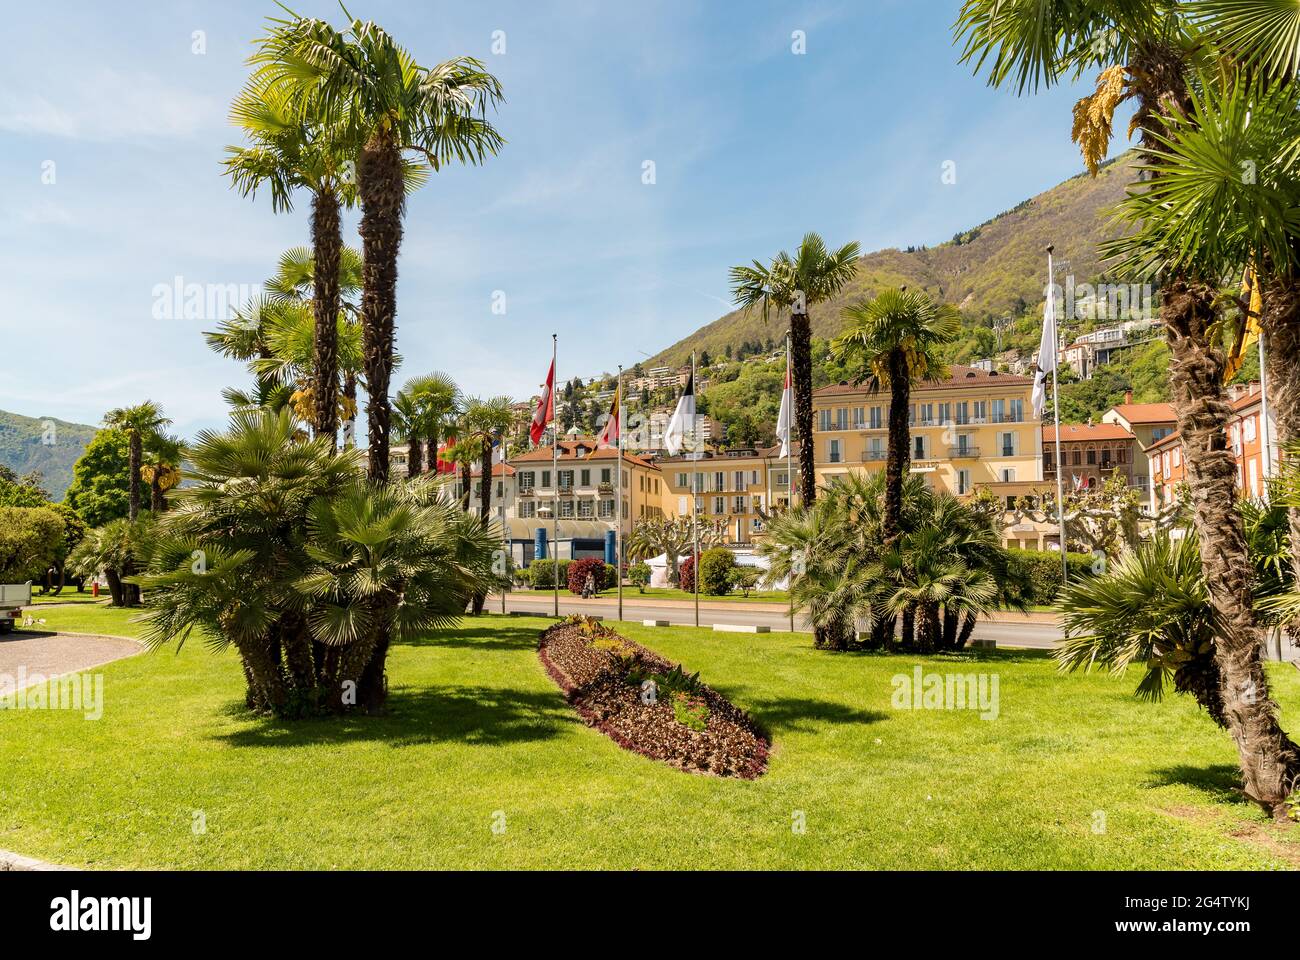 Green gardens decorated with palm trees and flowers at springtime in the center of Locarno, Ticino, Switzerland Stock Photo